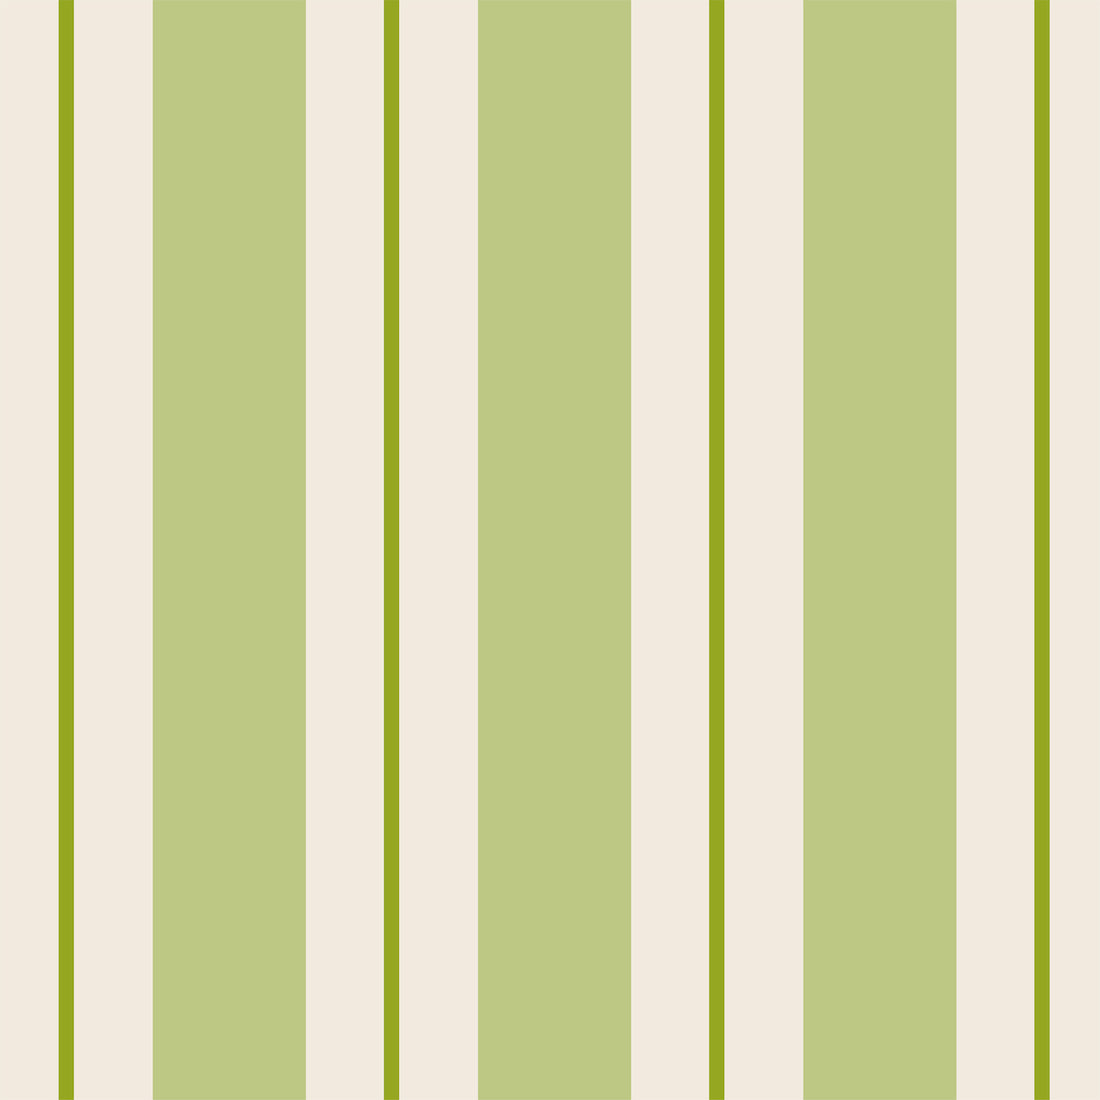 A square cocktail napkin featuring vertical light green and white stripes, with a bright green line centered in each white stripe.